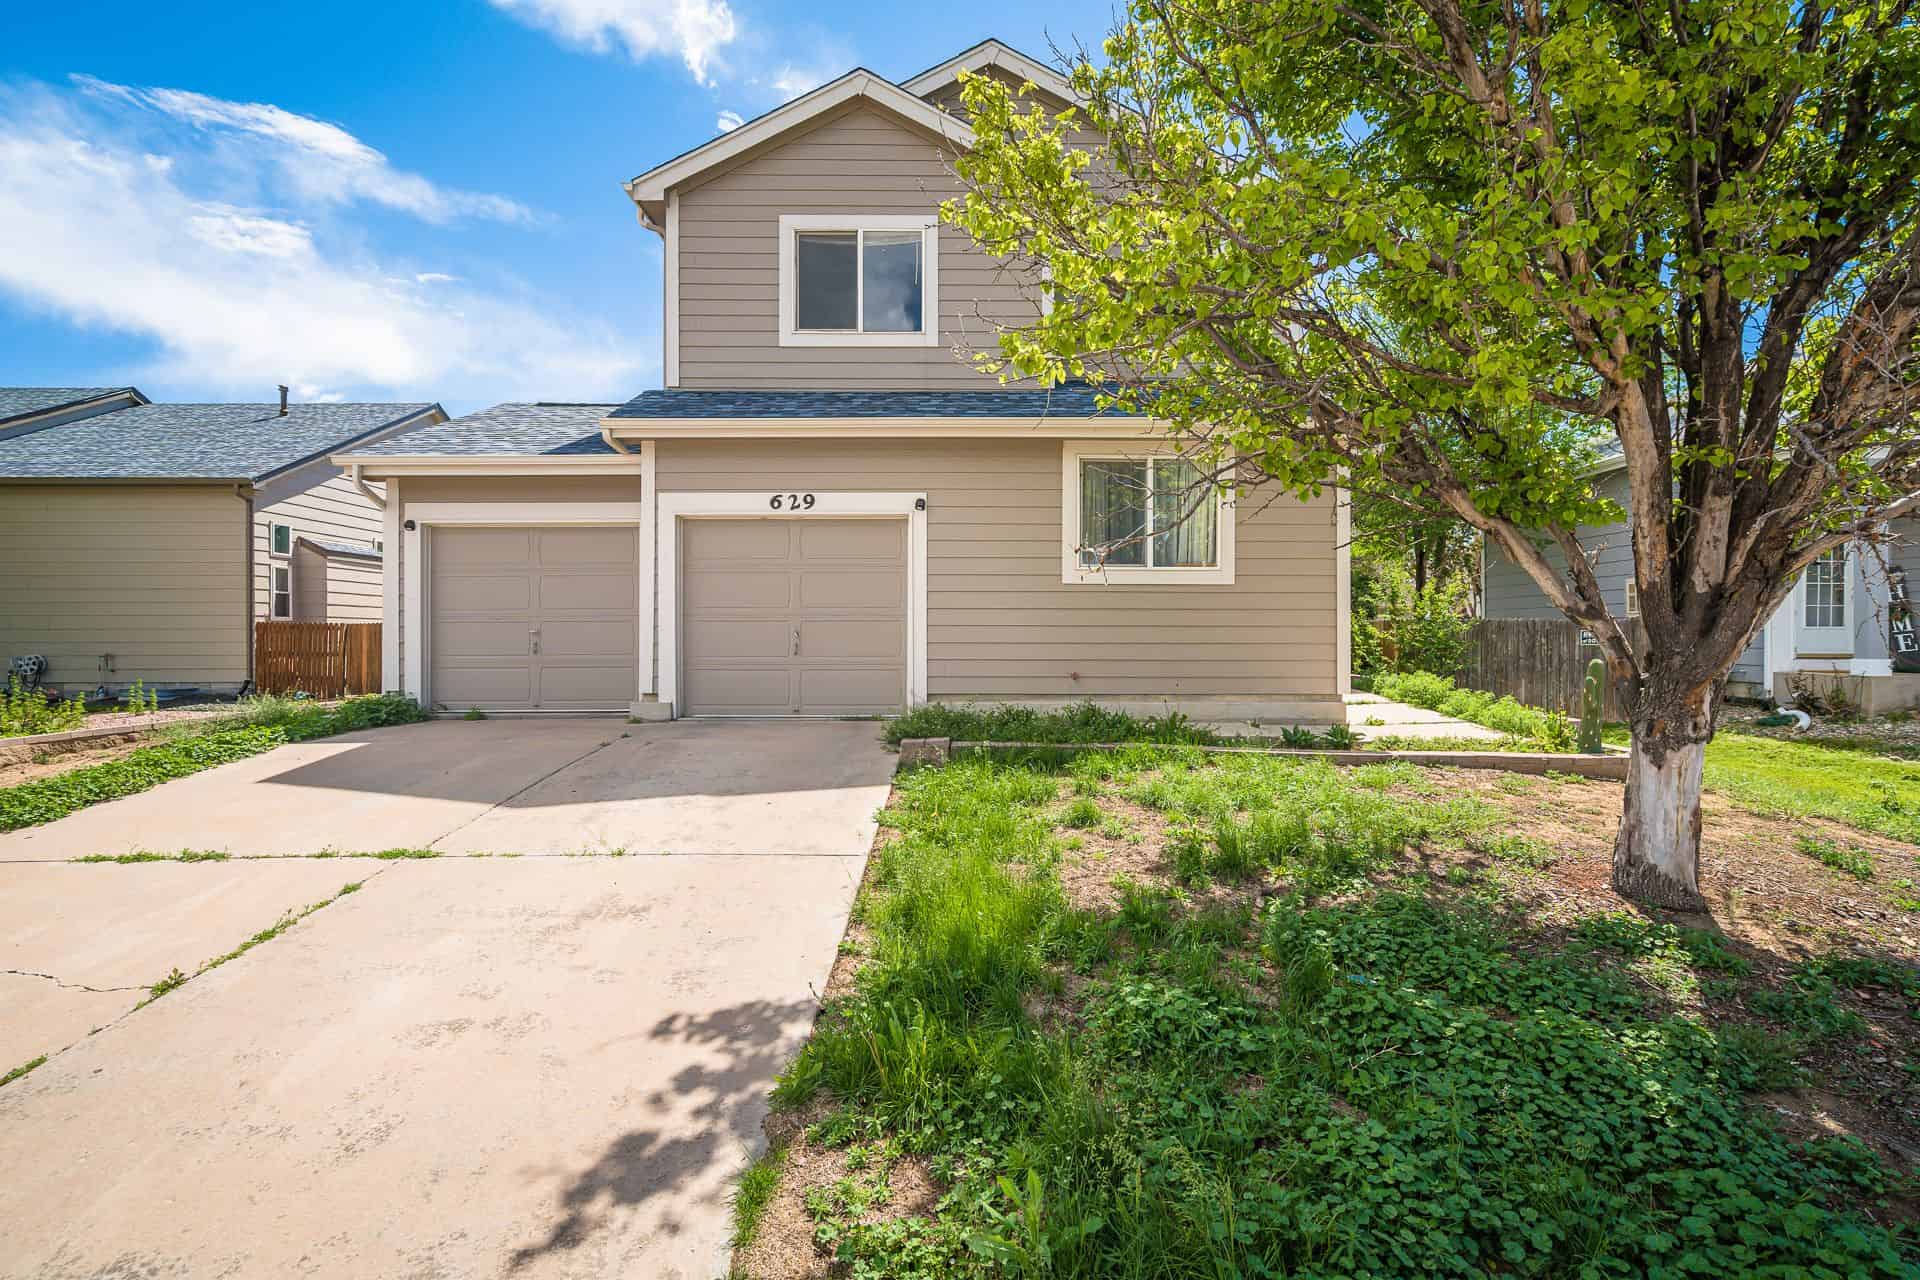 2-Story Home Minutes to Fort Carson